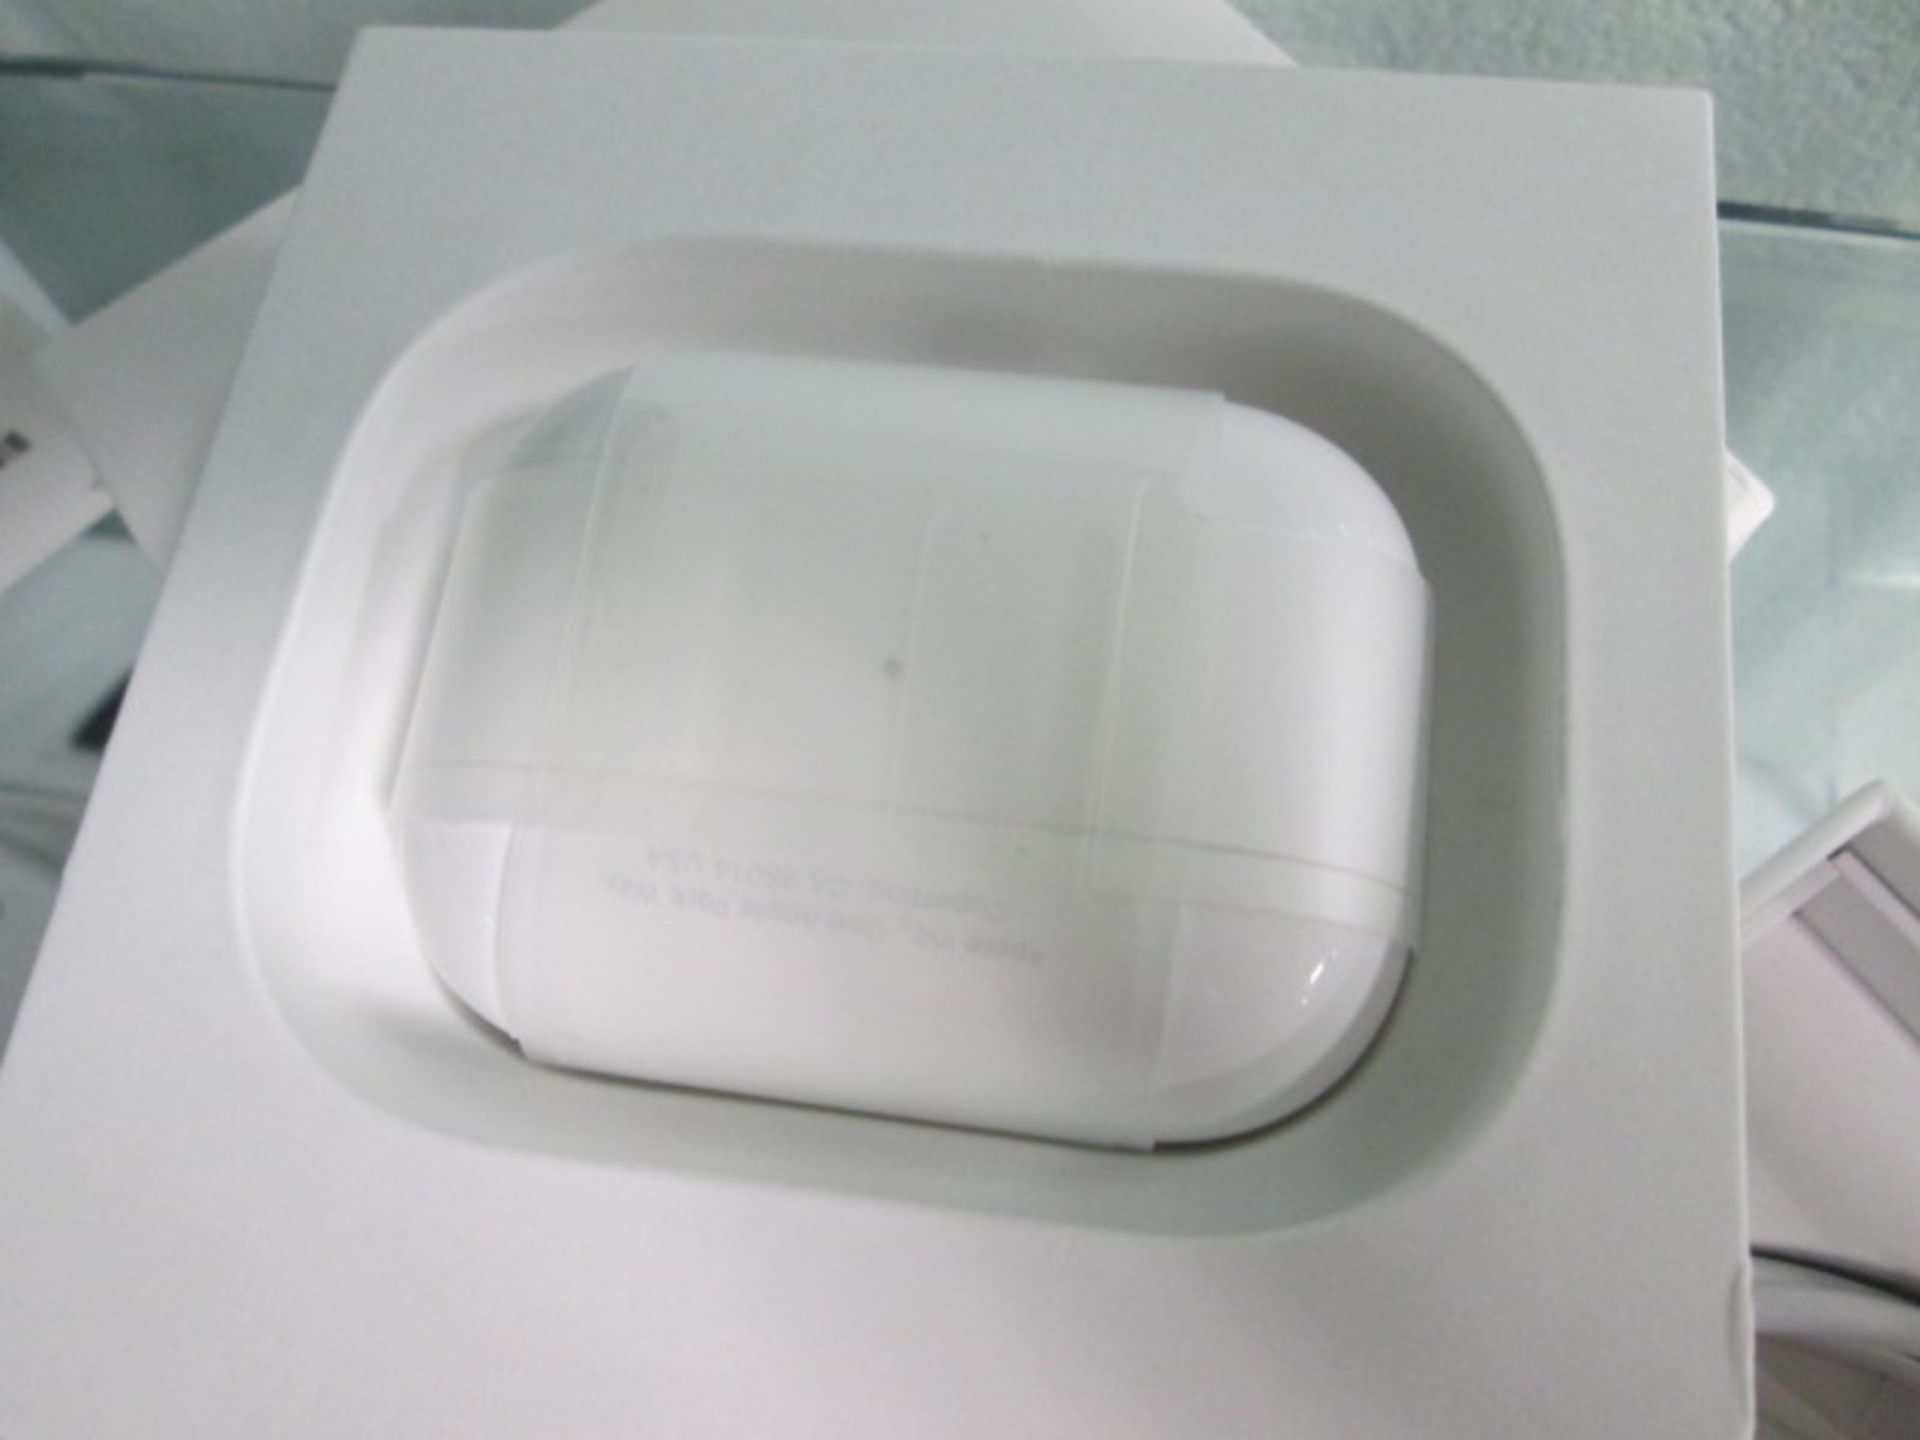 Apple Airpods Pro with wireless charging case and accessories in box - Image 3 of 3